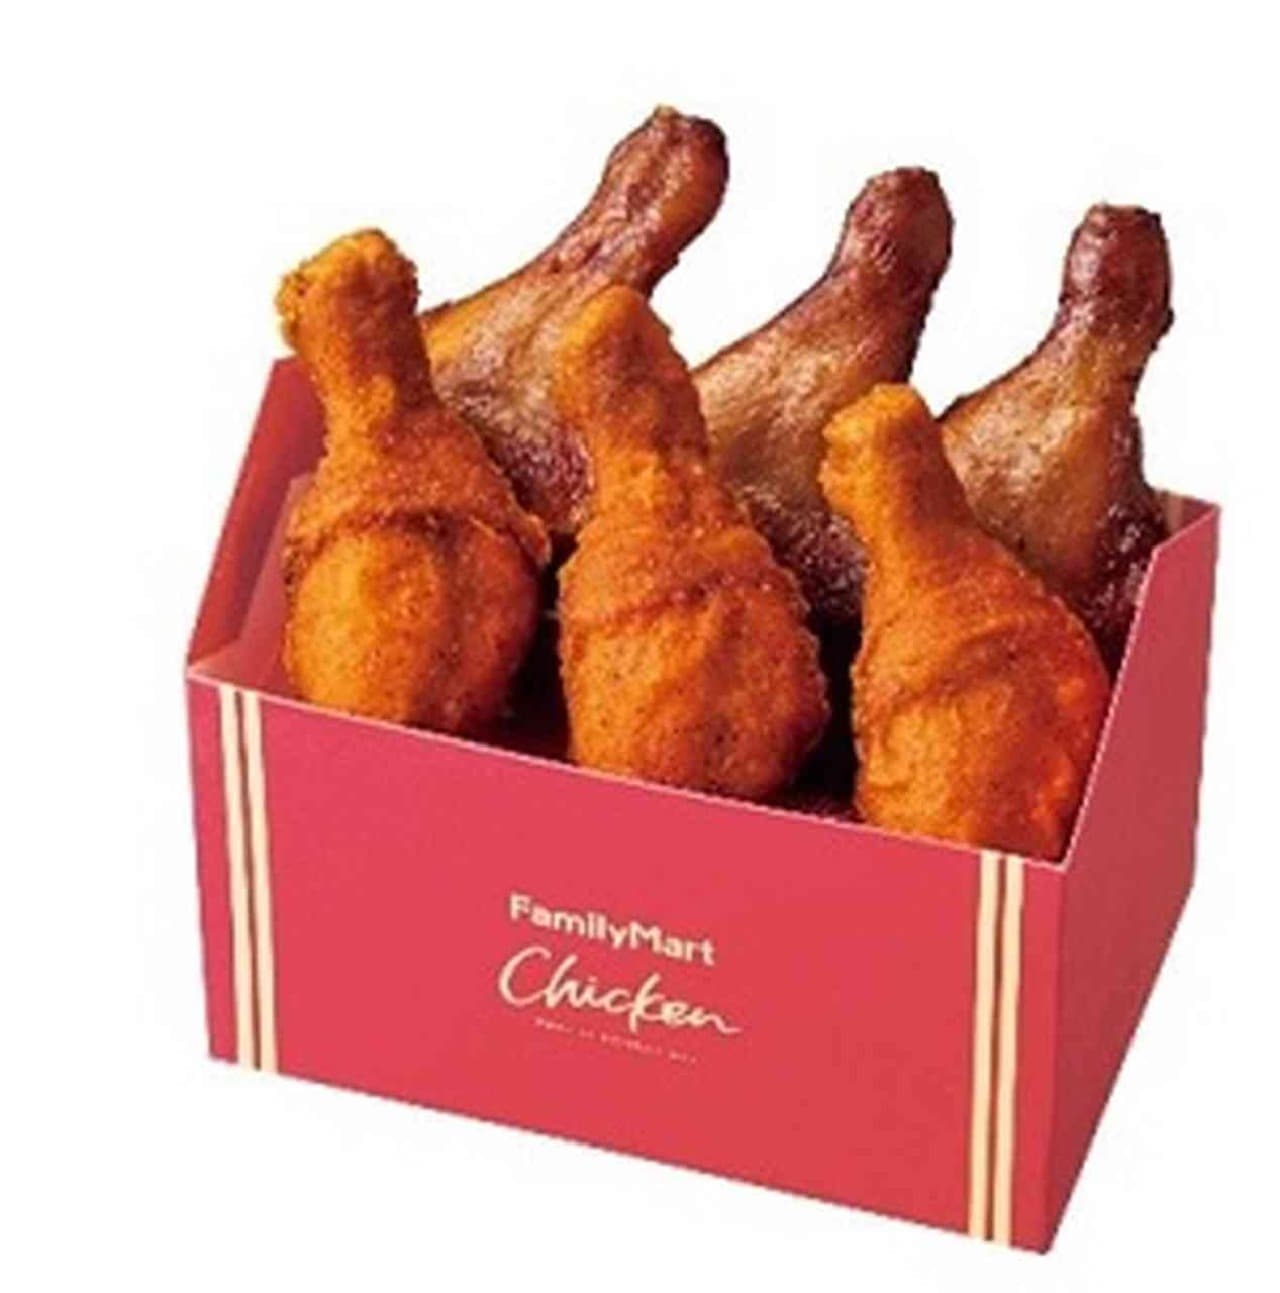 Famima Christmas Limited Edition Chicken Products